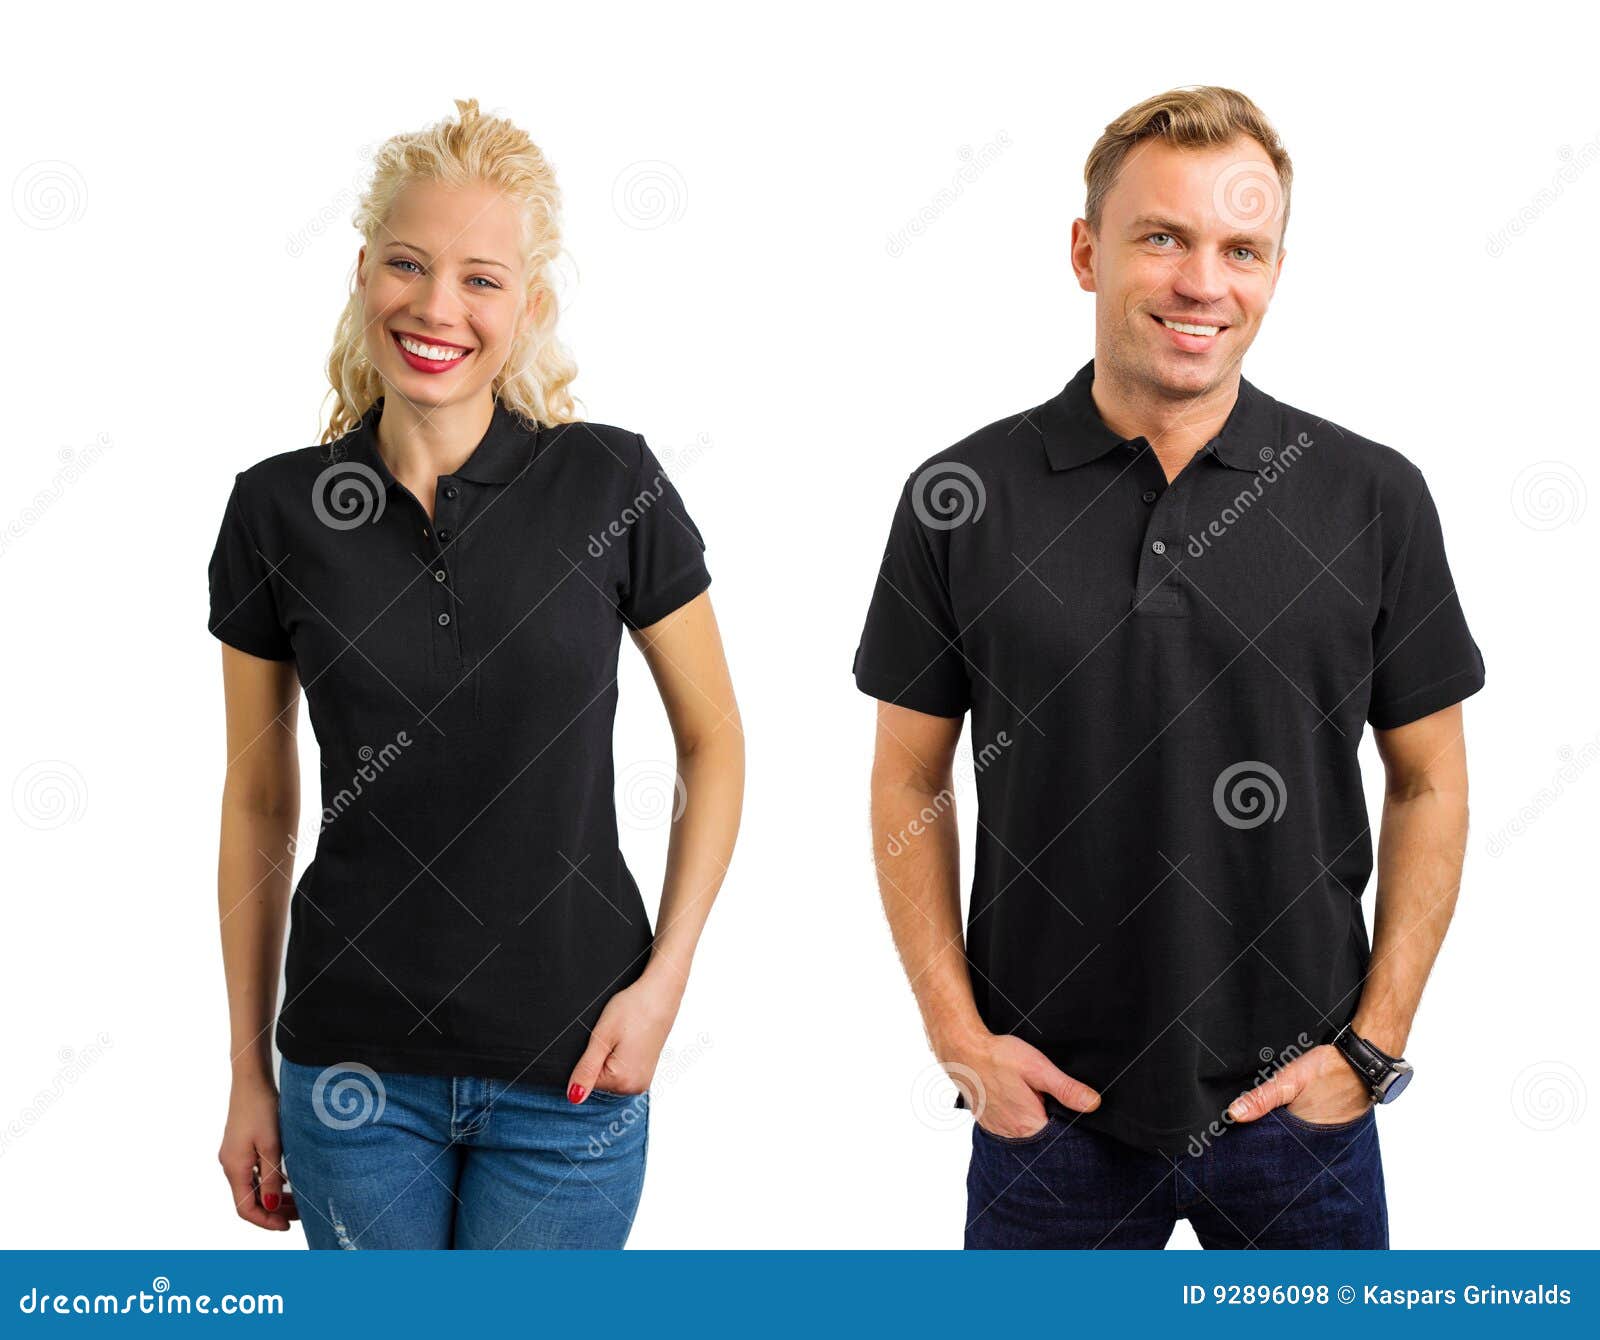 polo shirts for men and women